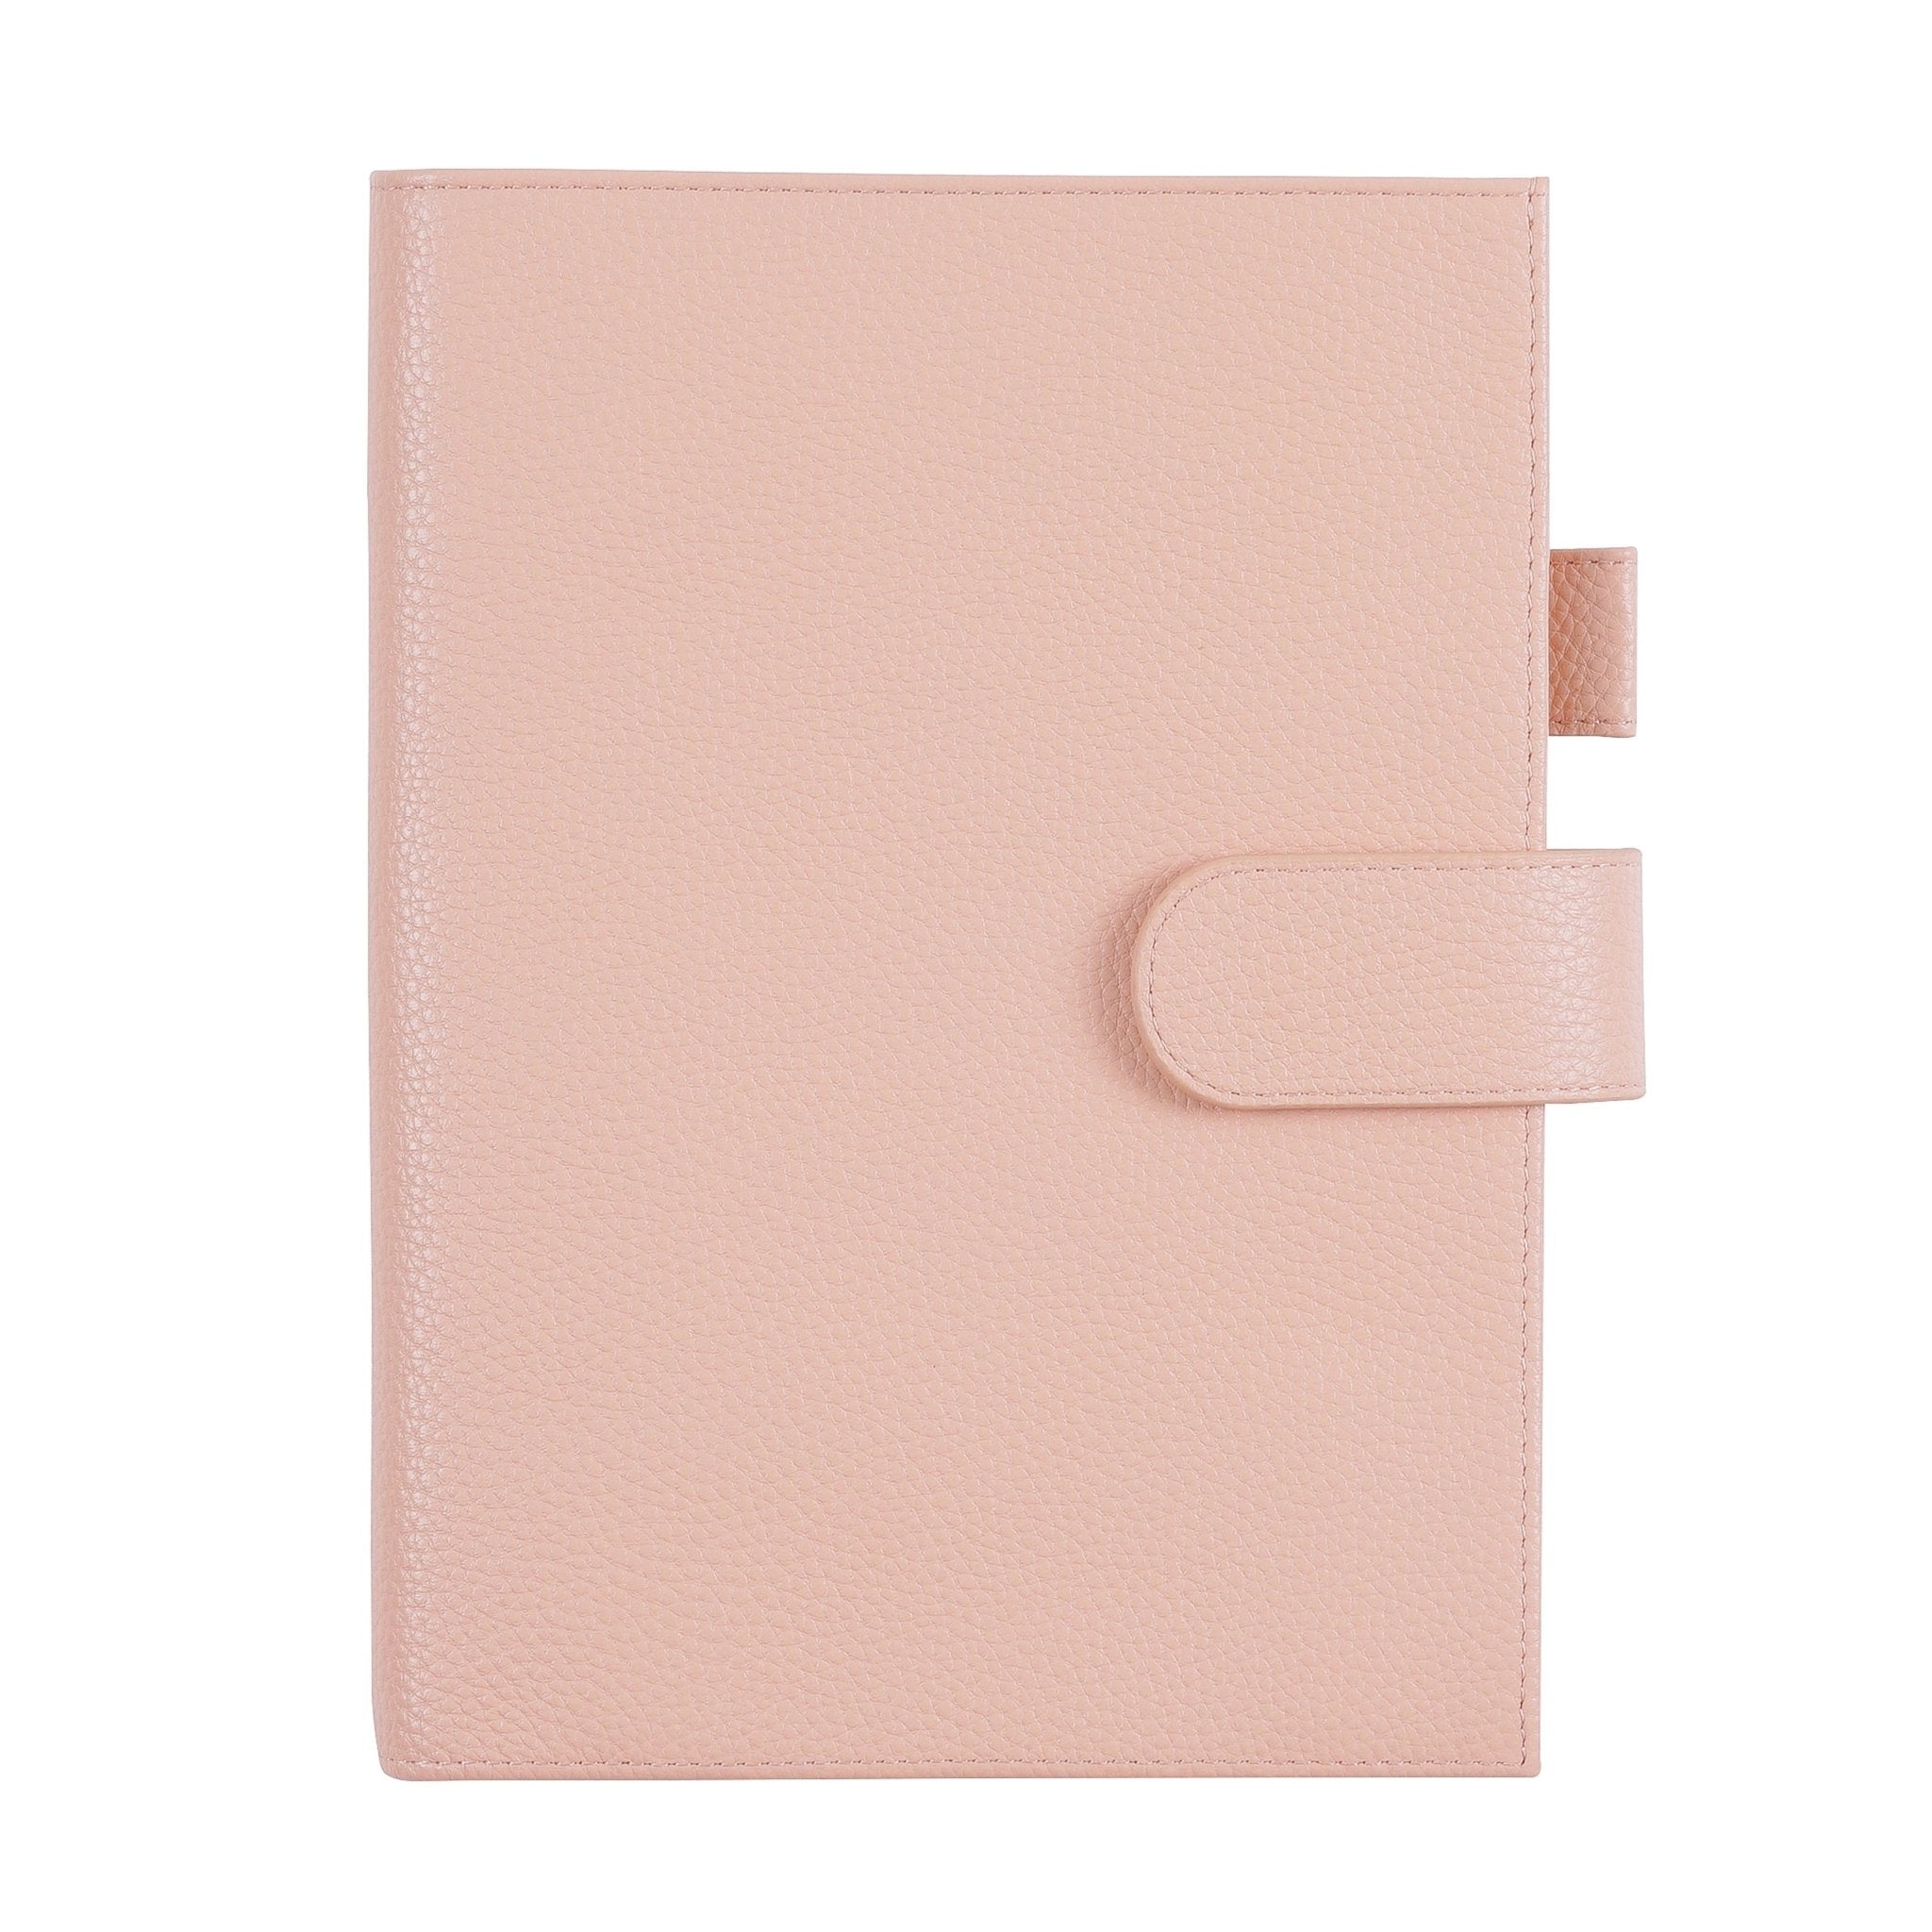 Limited Imperfect Moterm Original Series A5 Plus Cover for Hobonichi Cousin  A5 Notebook Genuine Leather Planner